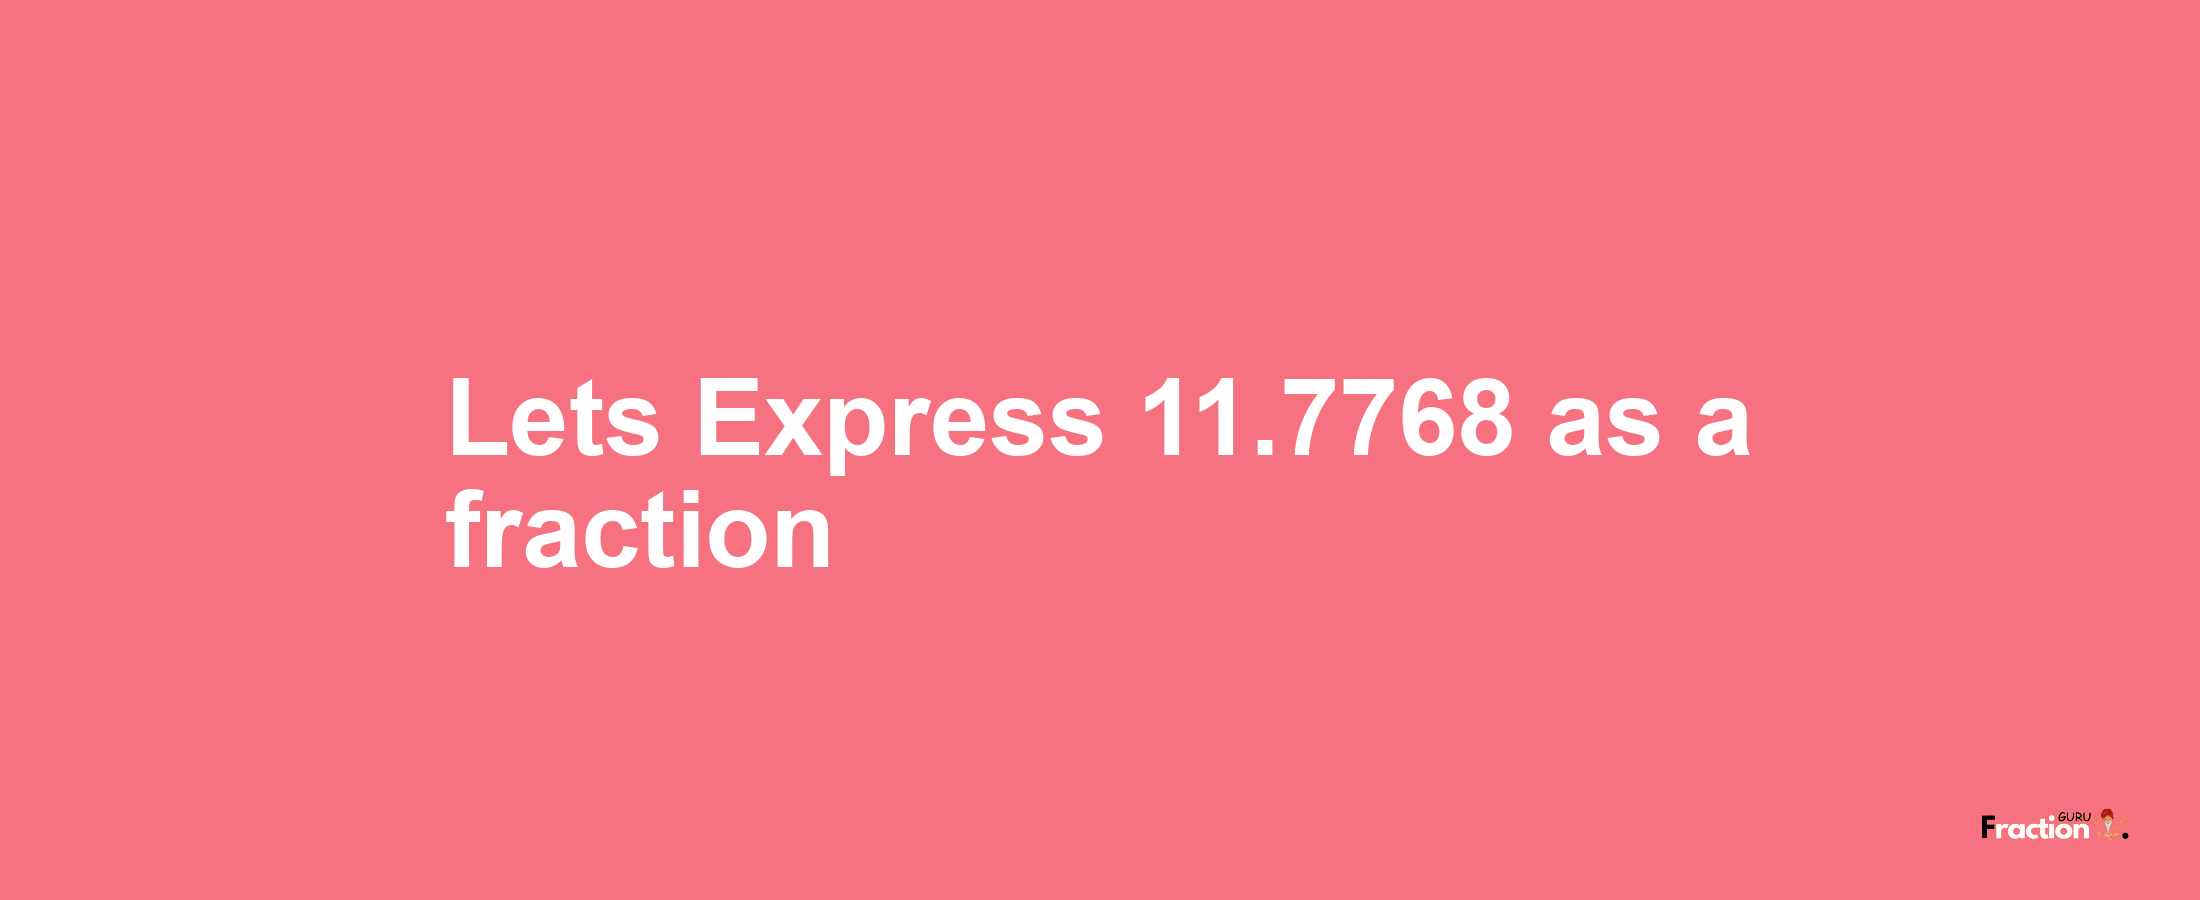 Lets Express 11.7768 as afraction